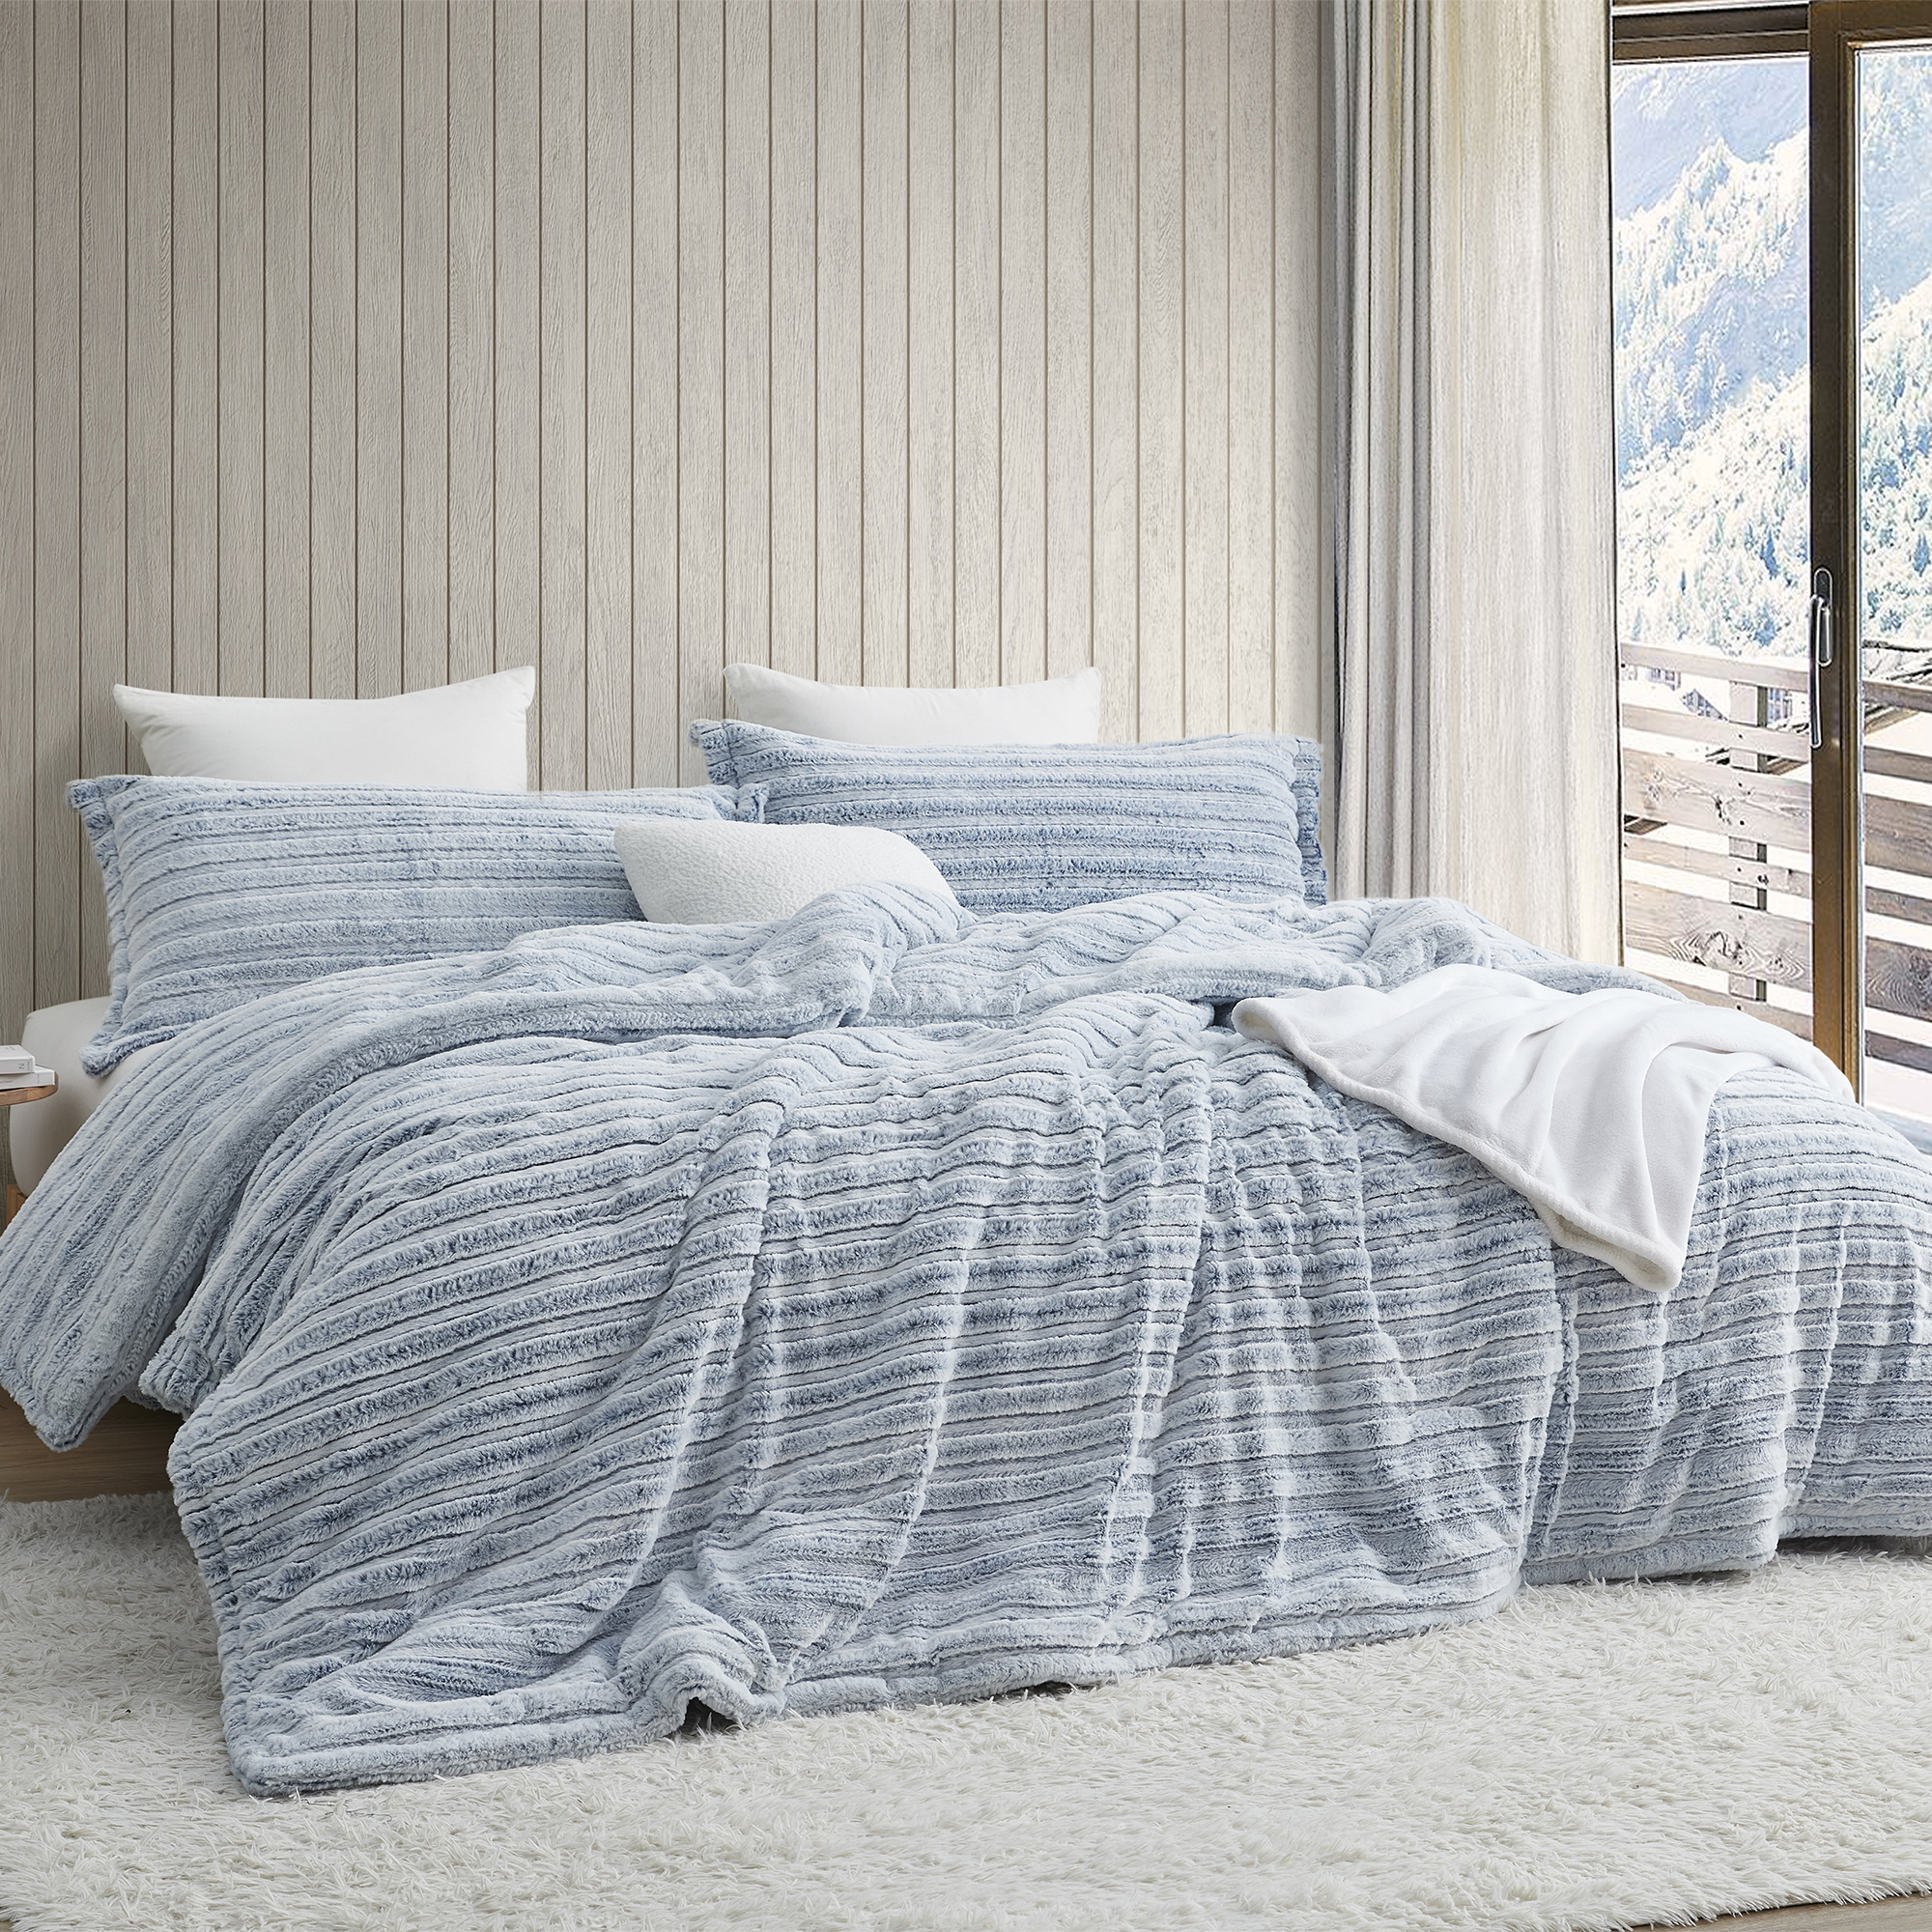 Softer than Soft - Coma Inducer® Oversized King Comforter - Frosted Navy Stripe